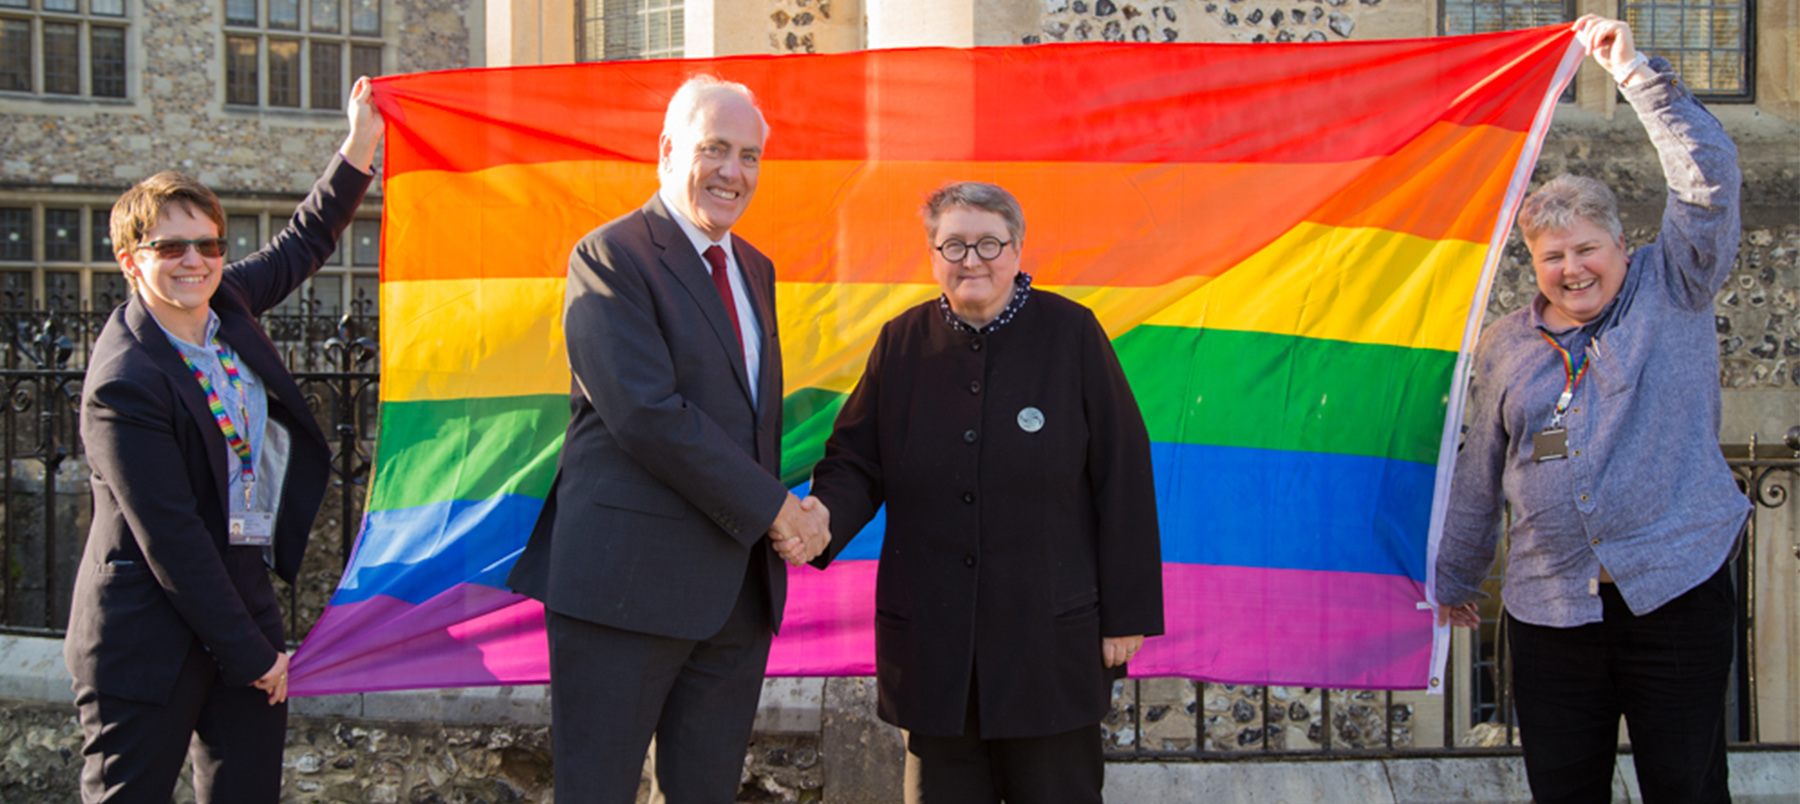 Two people shaking hands in front of a rainbow Pride flag